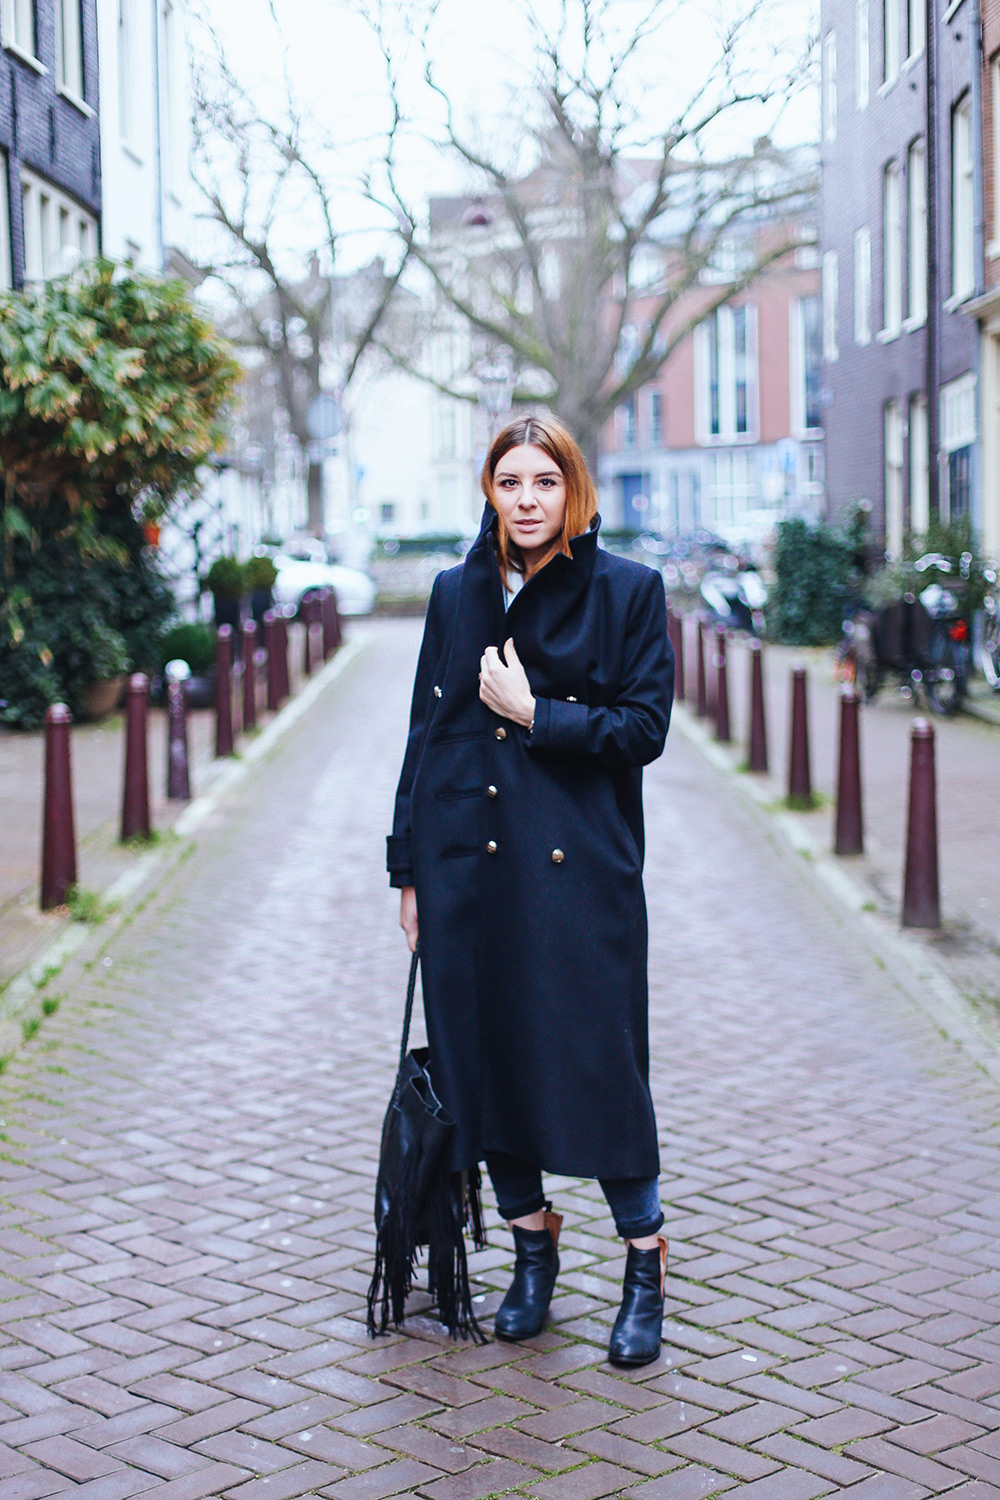 who is mocca, modeblog, fashionblog, influencer, amsterdam streetstyle, oversize mantel kombinieren, cut out boots, winter outfit, whoismocca.com